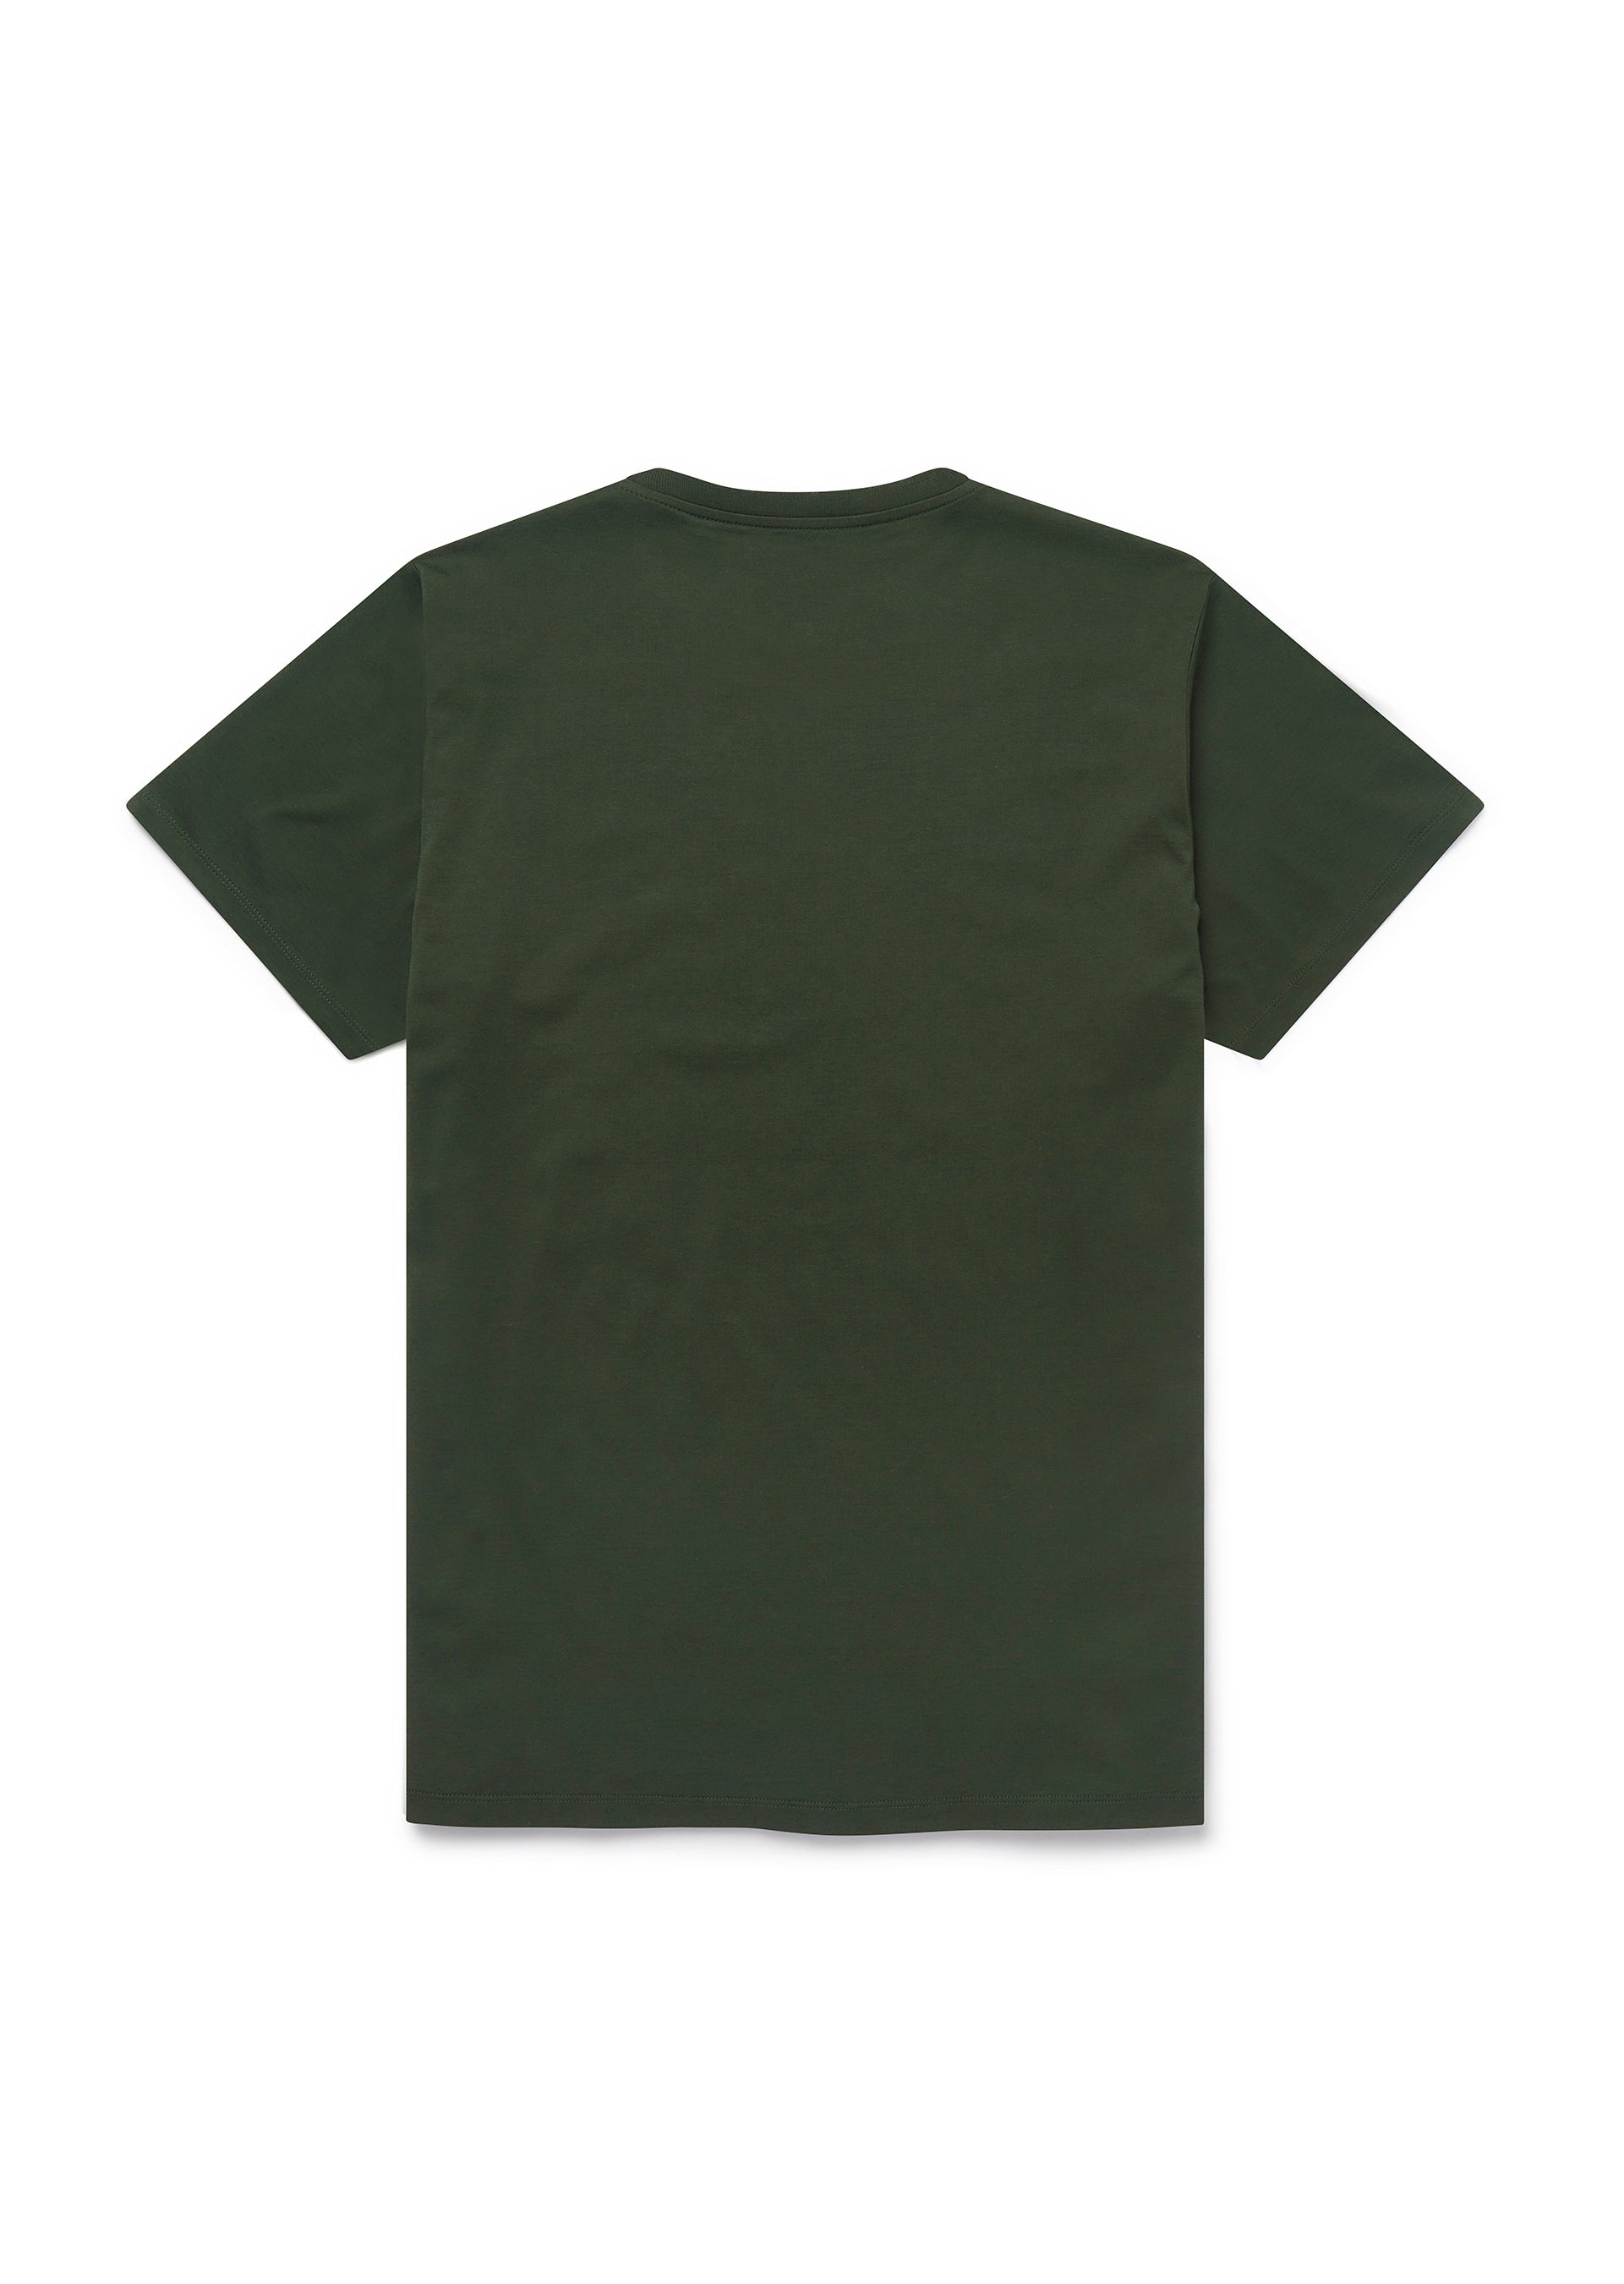 Classic T-Shirt in Forest – albam Clothing